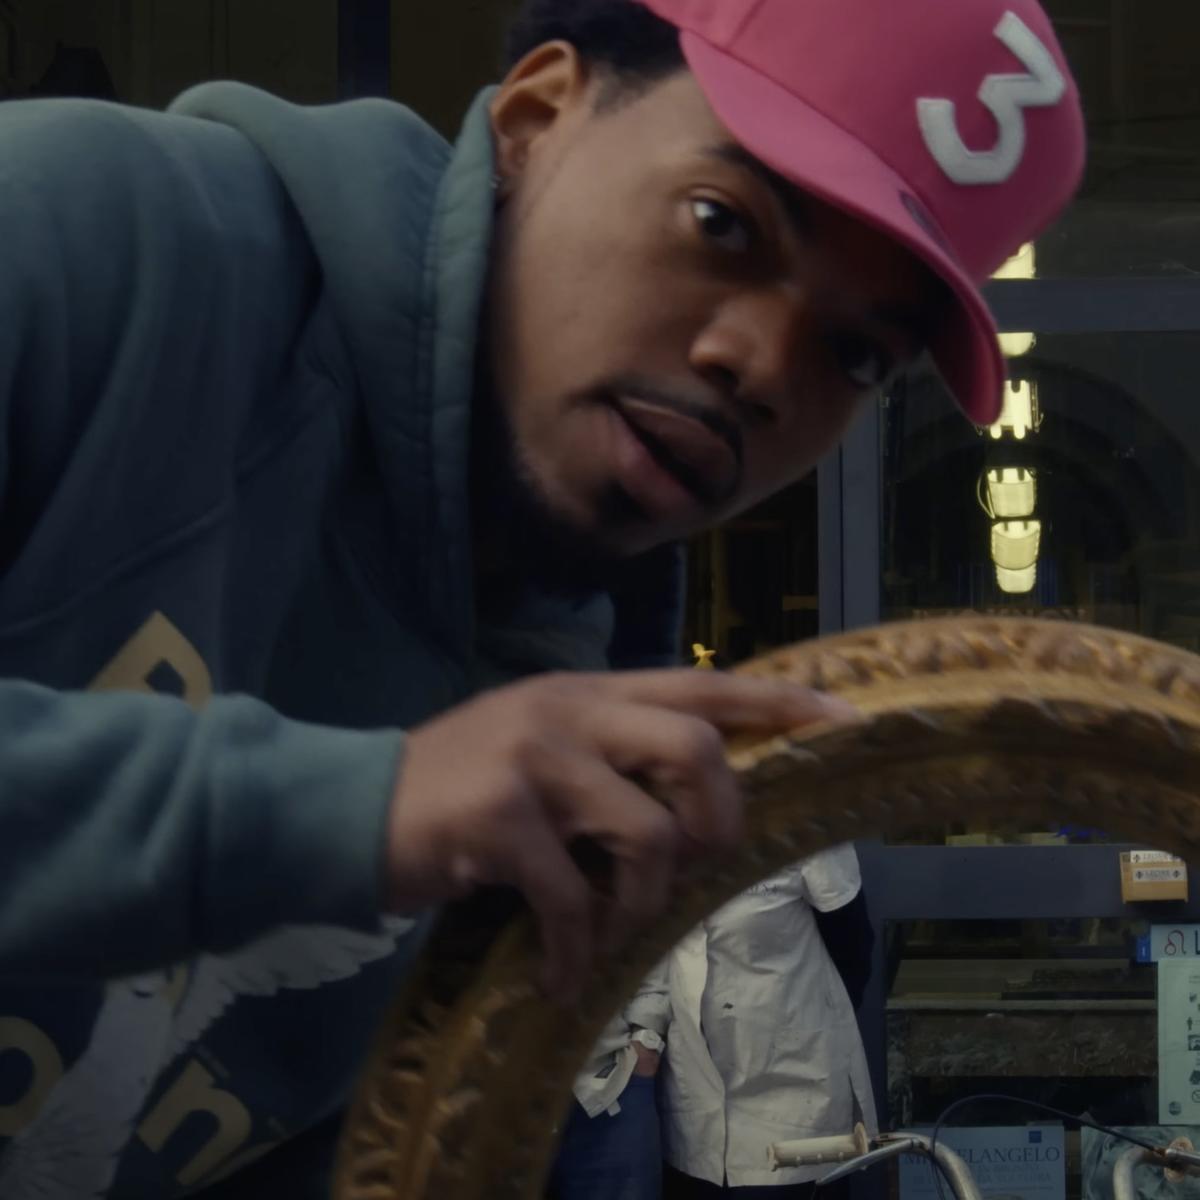 DOWNLOAD MP3: Chance The Rapper - A Bar About A Bar